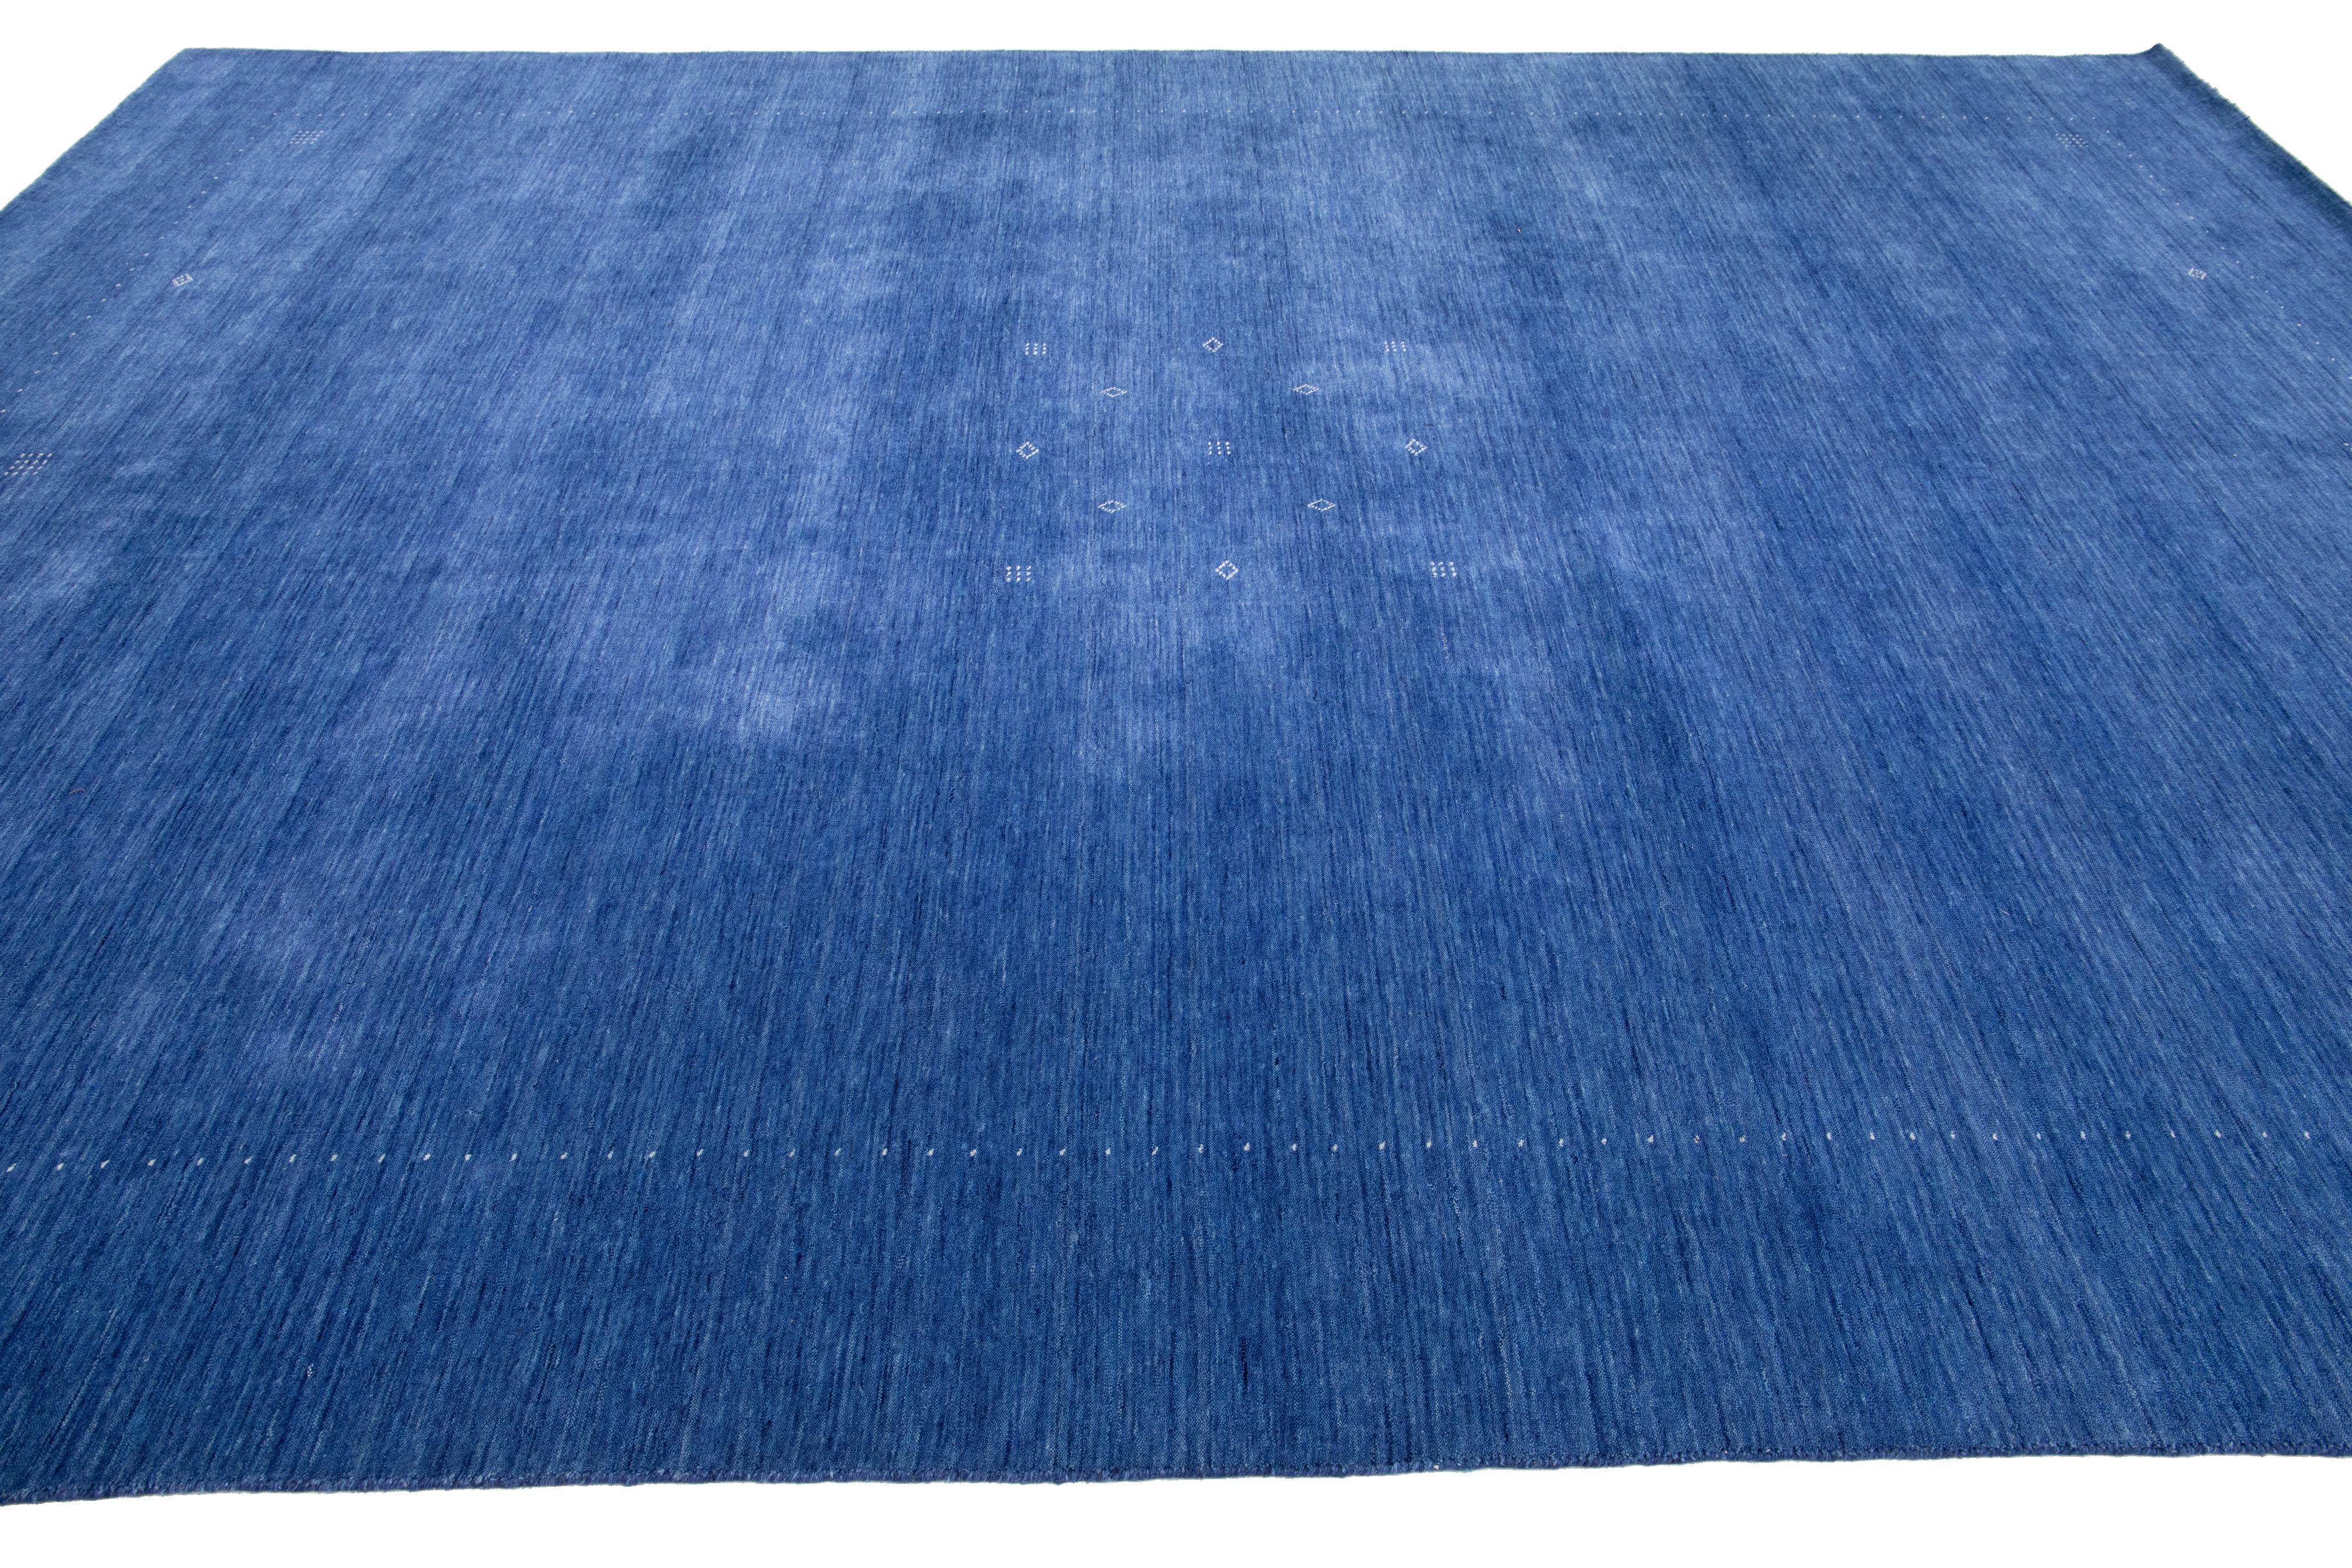 Minimalist Handmade Modern Persian Gabbeh Wool Rug In Navy Blue In New Condition For Sale In Norwalk, CT